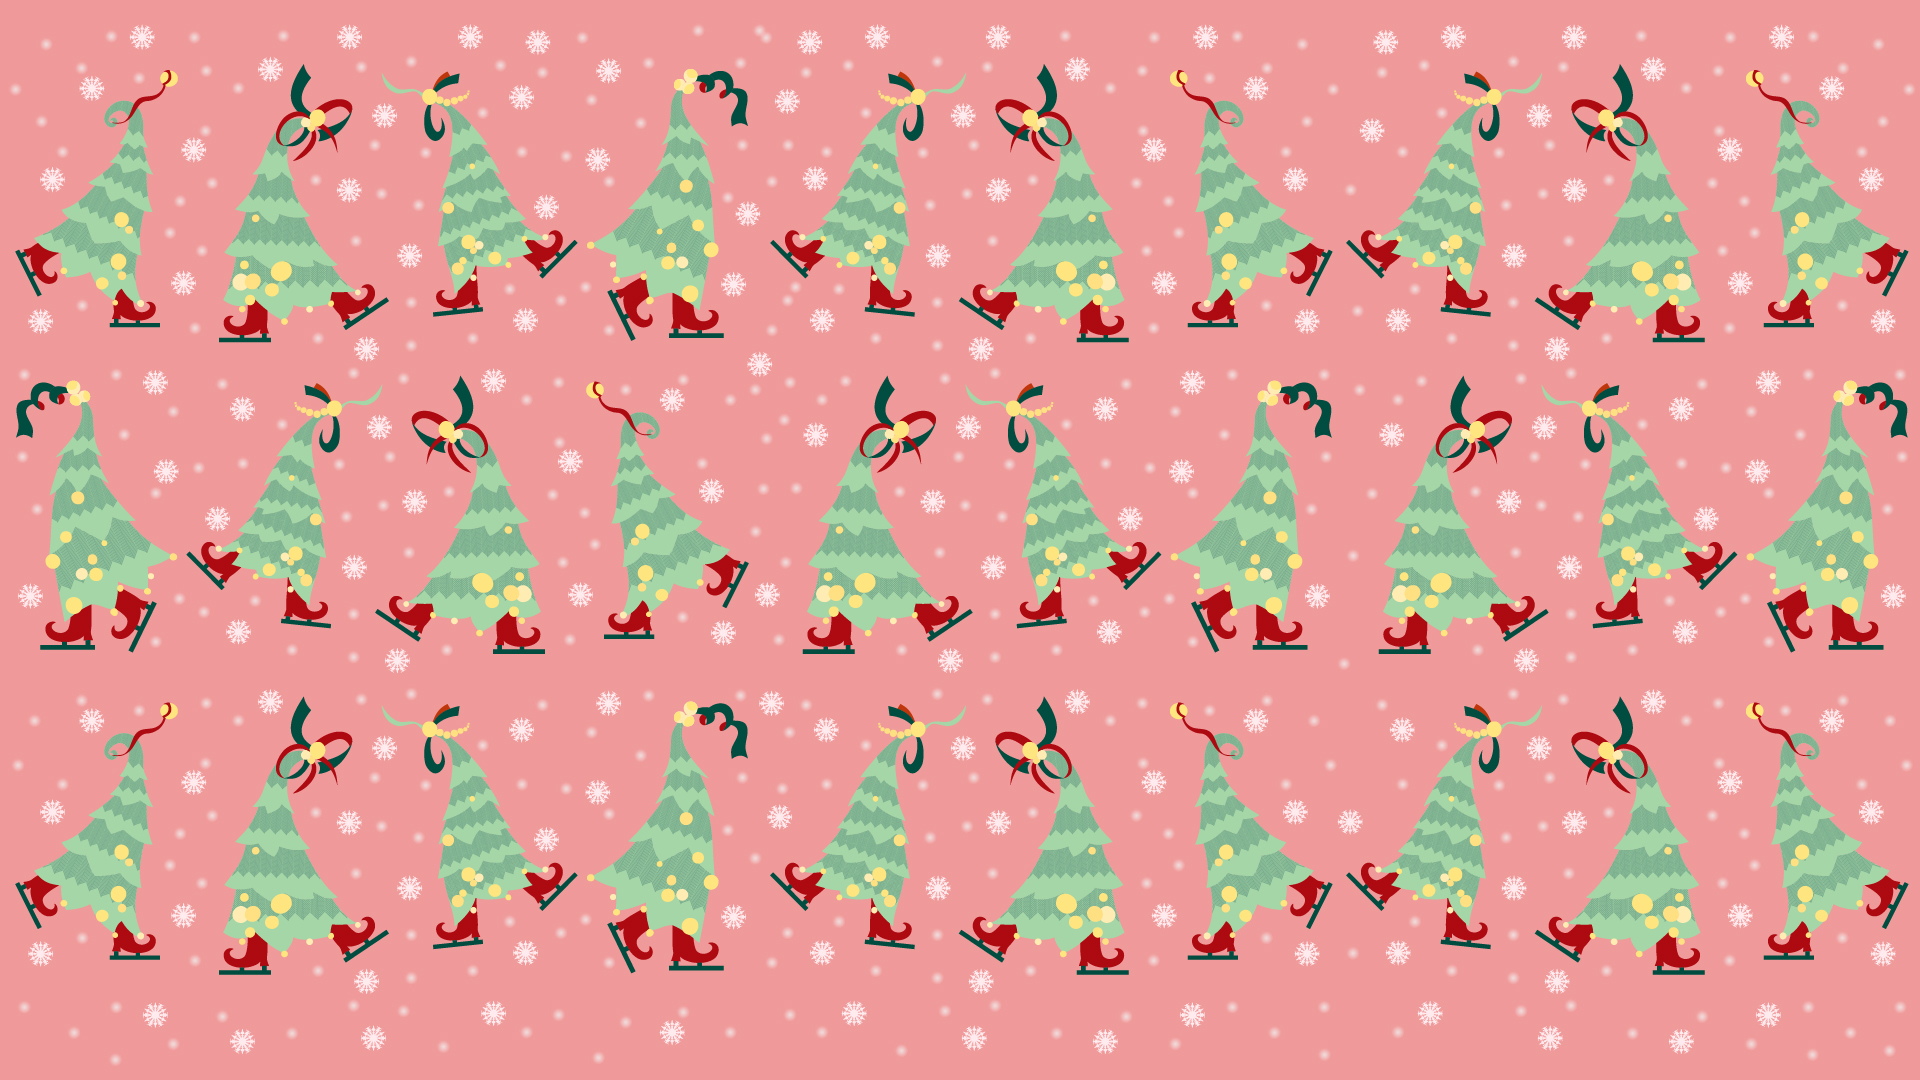 Festive Christmas Wallpaper For Laptops And Devices